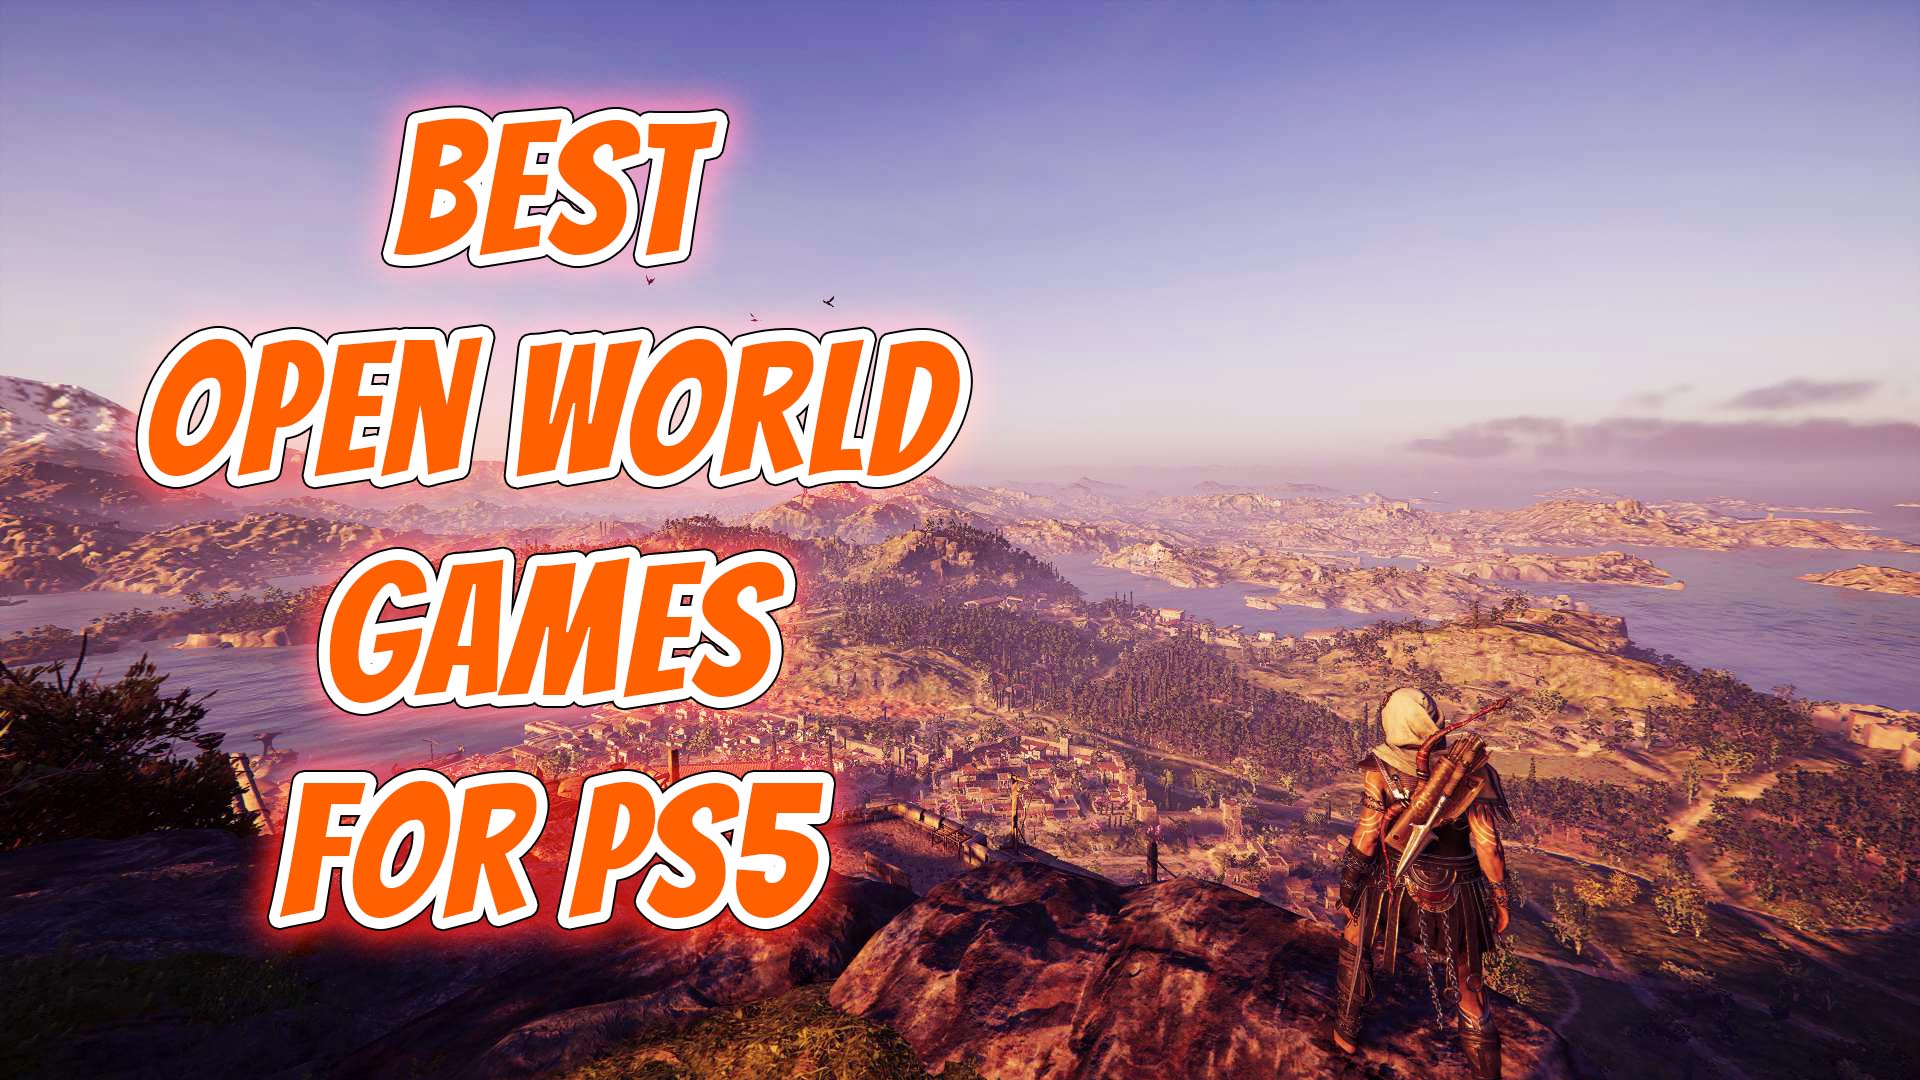 Best Open World Games for PS5 You Should Play!